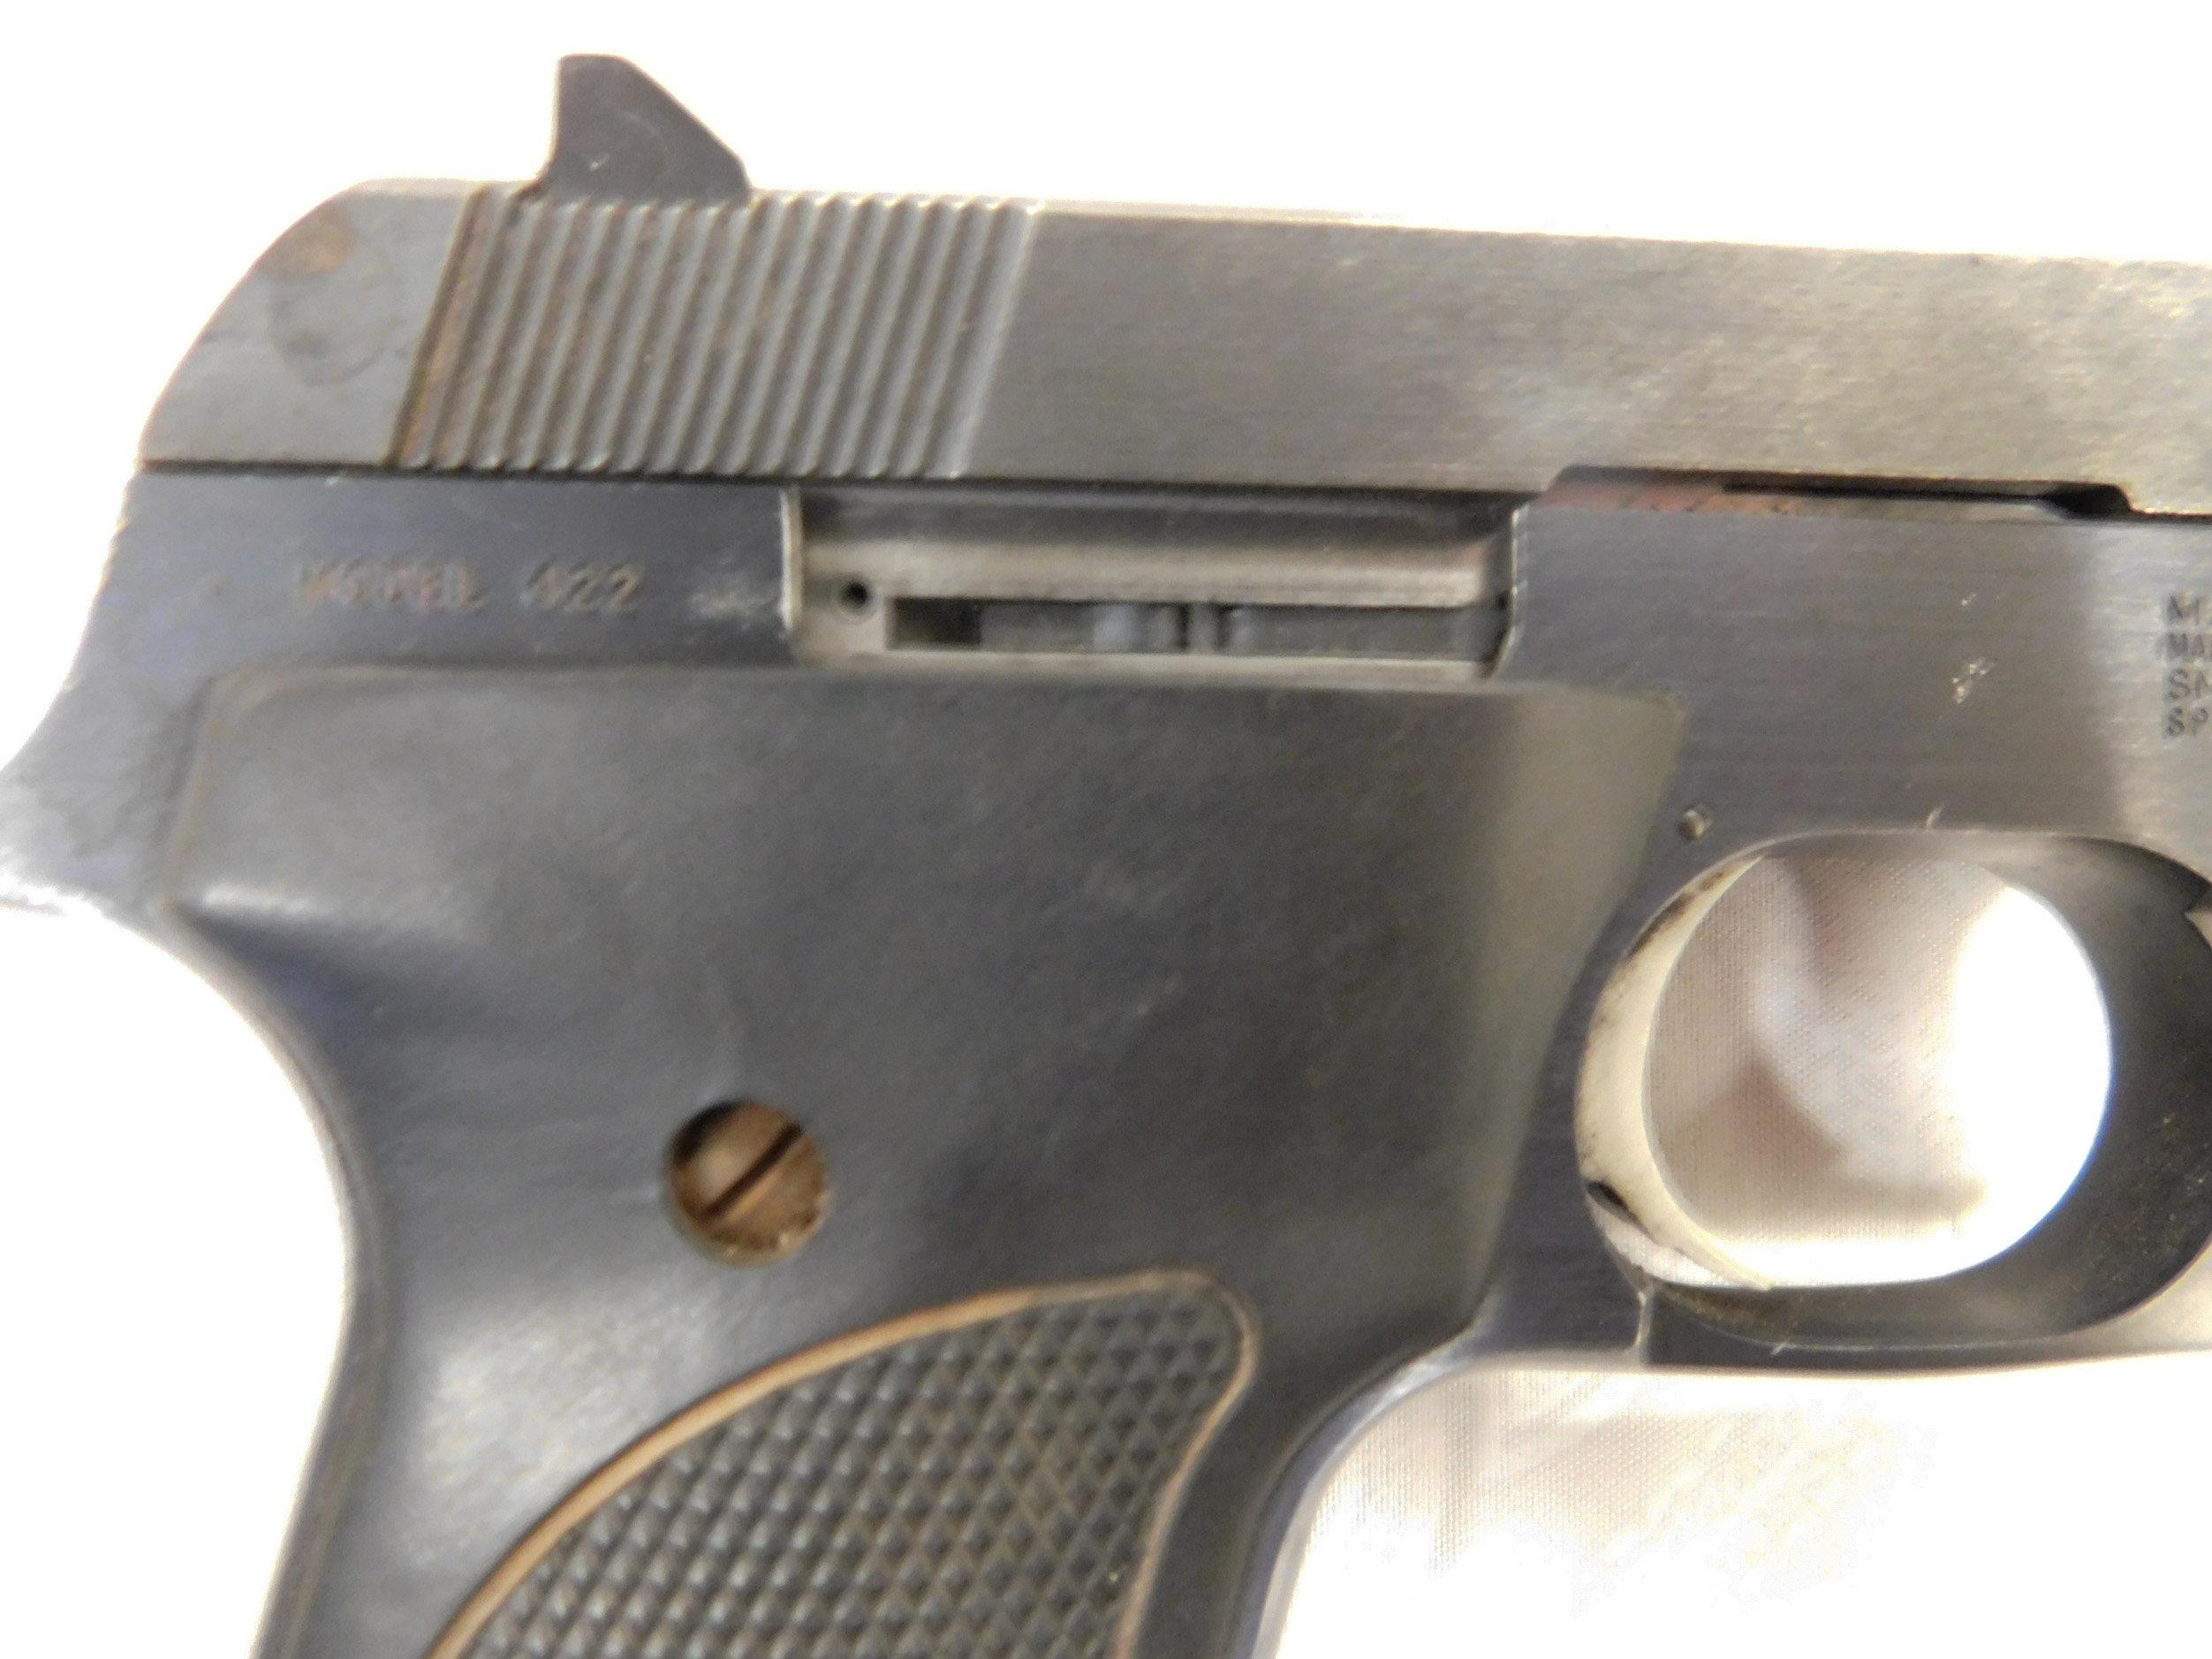 Smith and Wesson 22LR Pistol